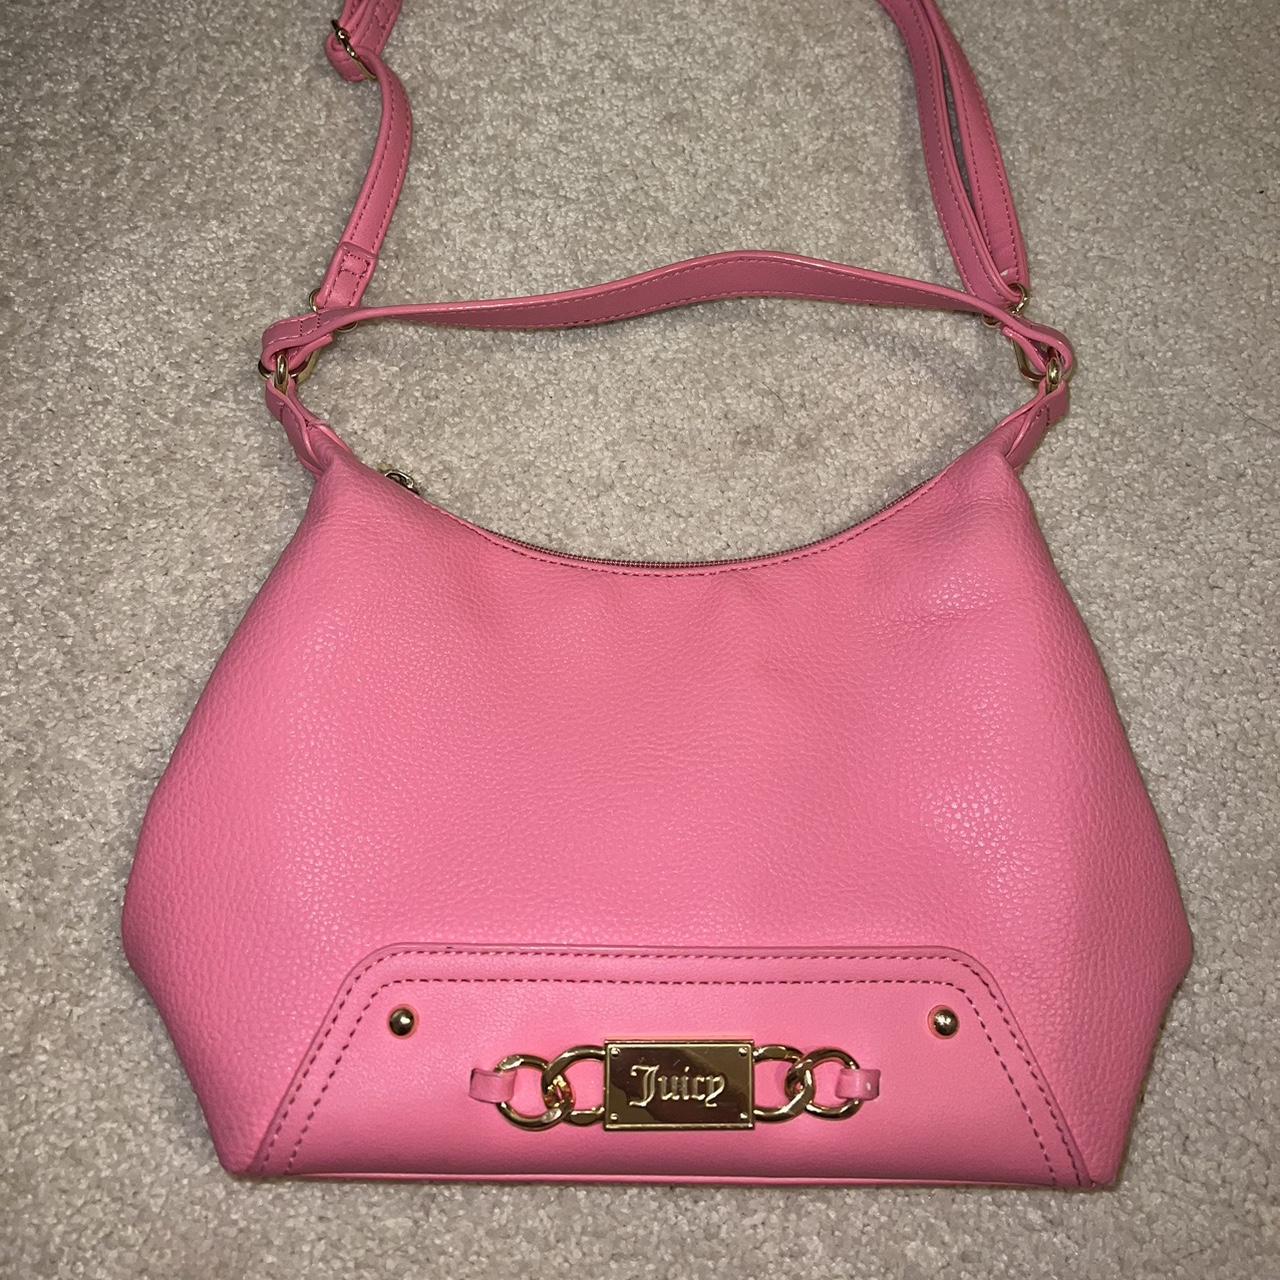 Juicy Couture | Bags | Juicy Couture Bag Fluffy Fur Hot Pink Satchel With  Bling Logo And Zipper | Poshmark